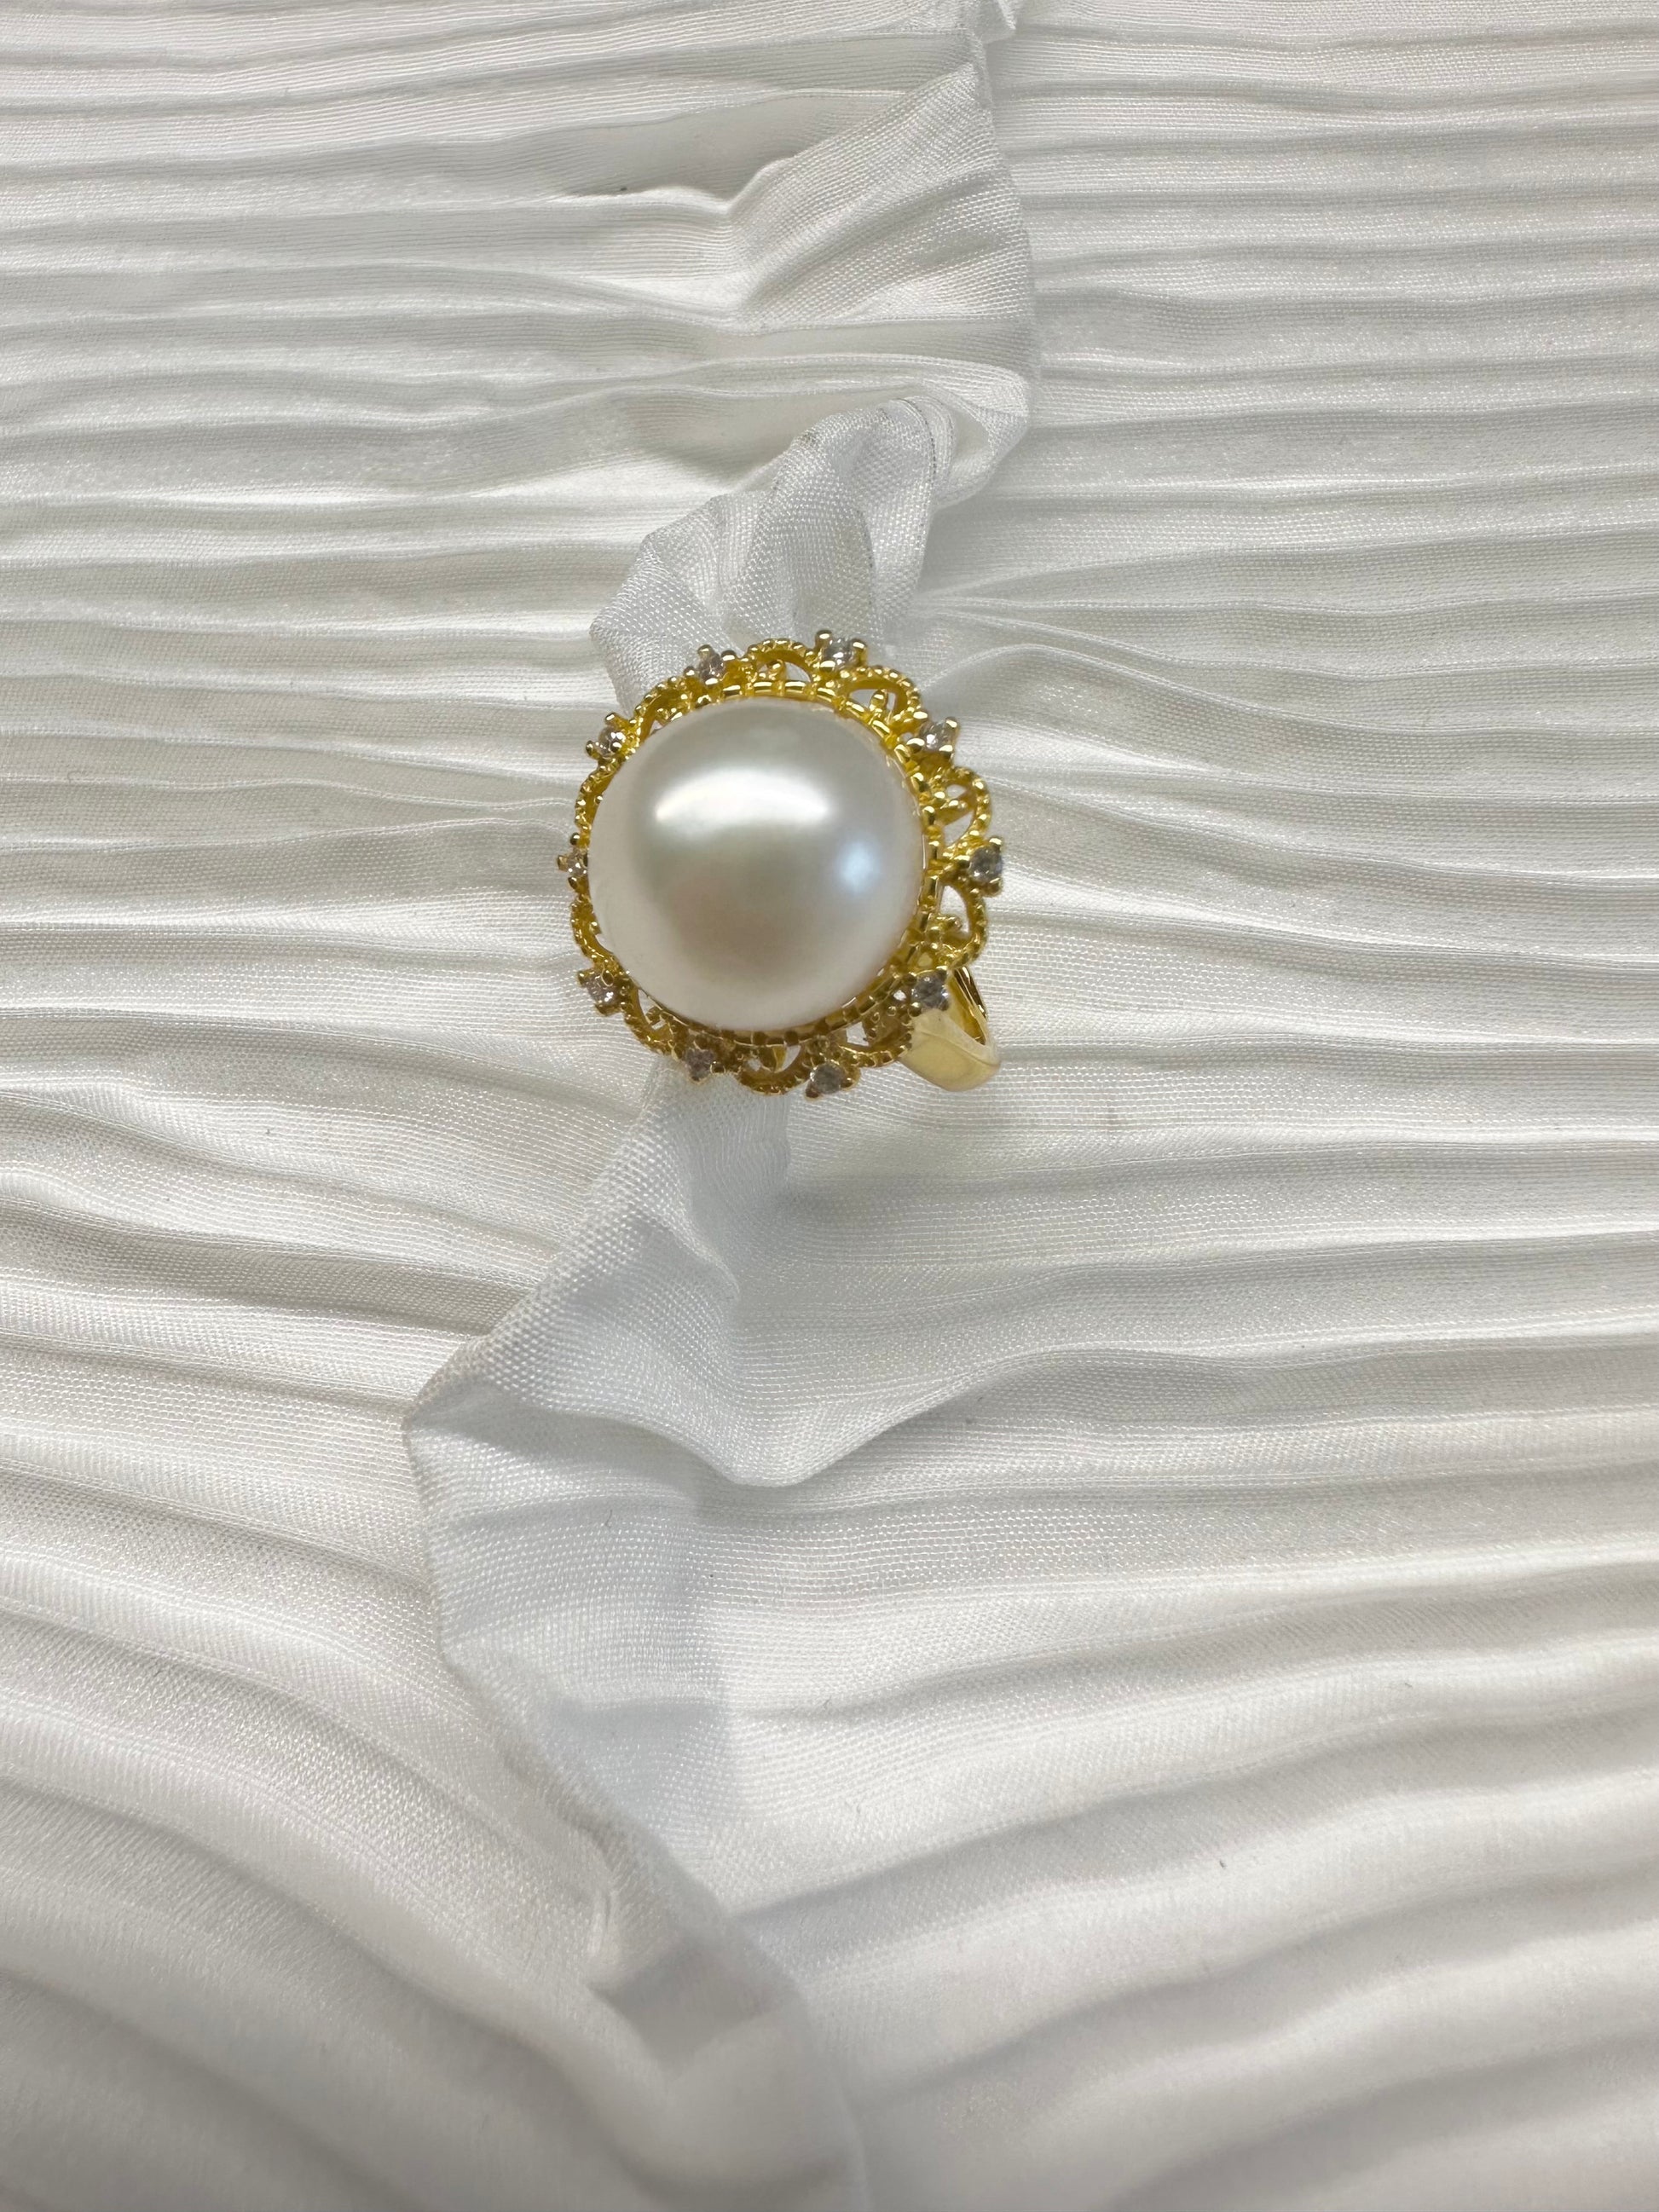 Palace Crown Series Lace Diamond Pearl Ring